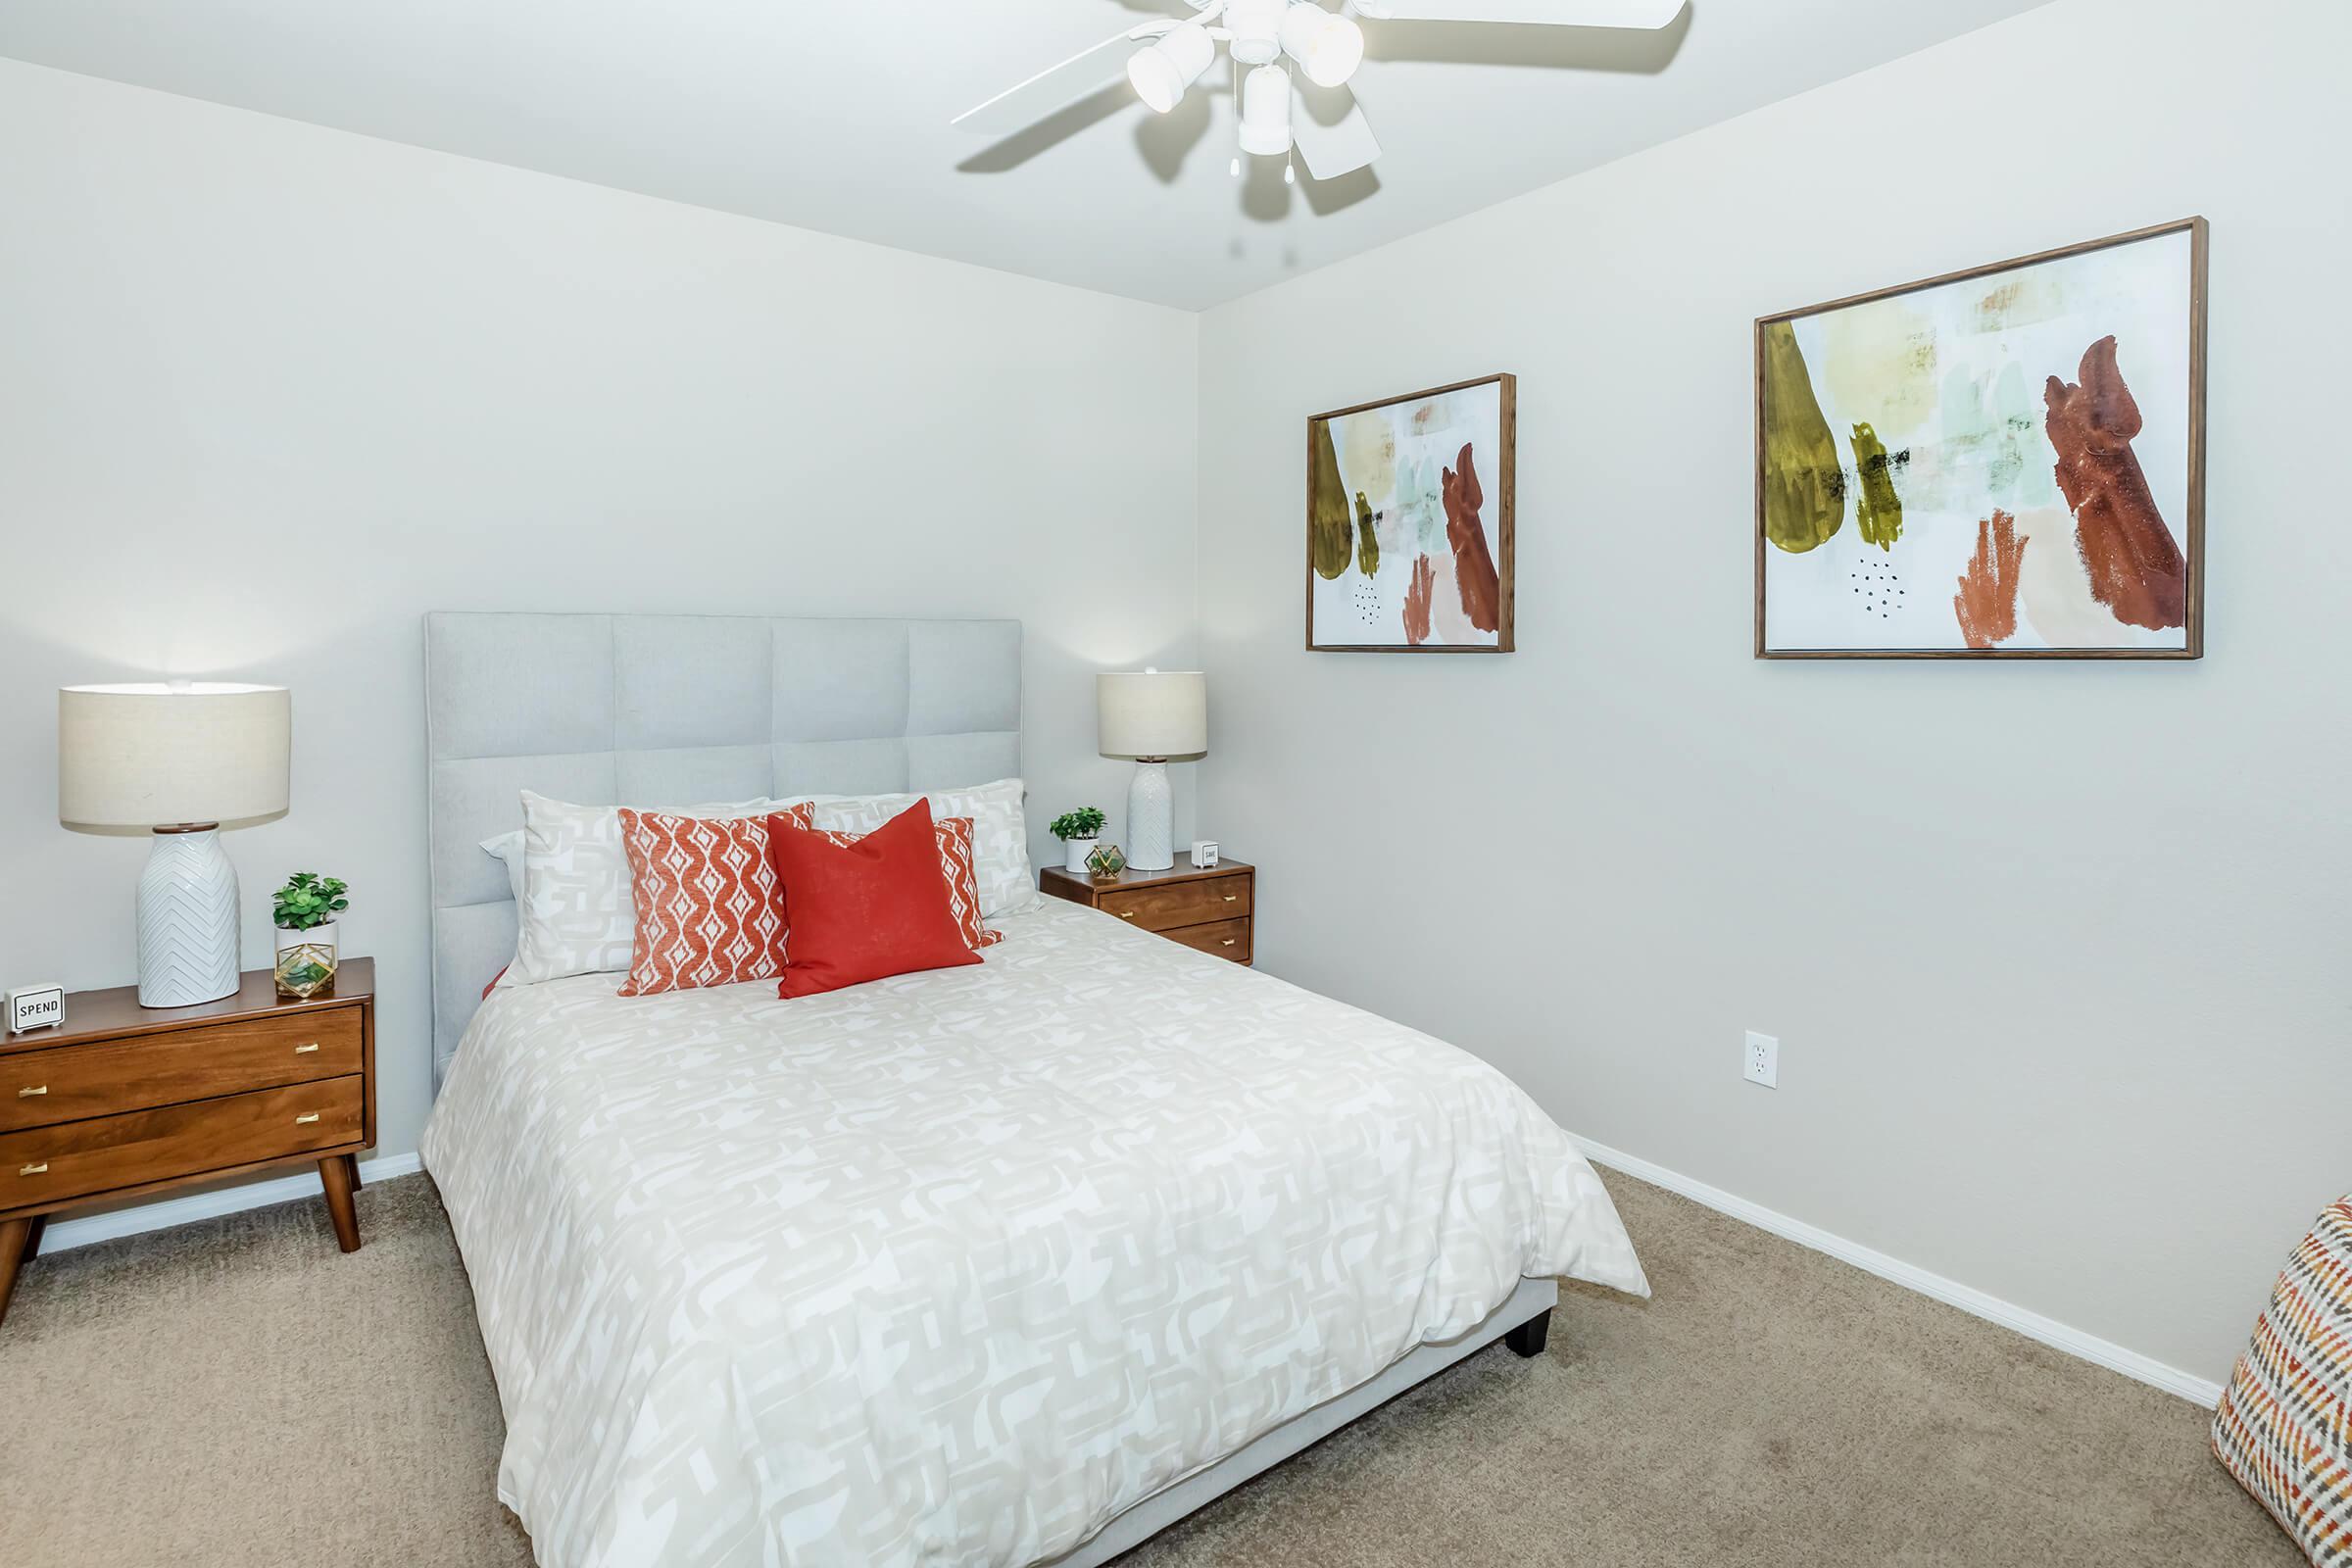 LIGHTED CEILING FANS IN BEDROOM